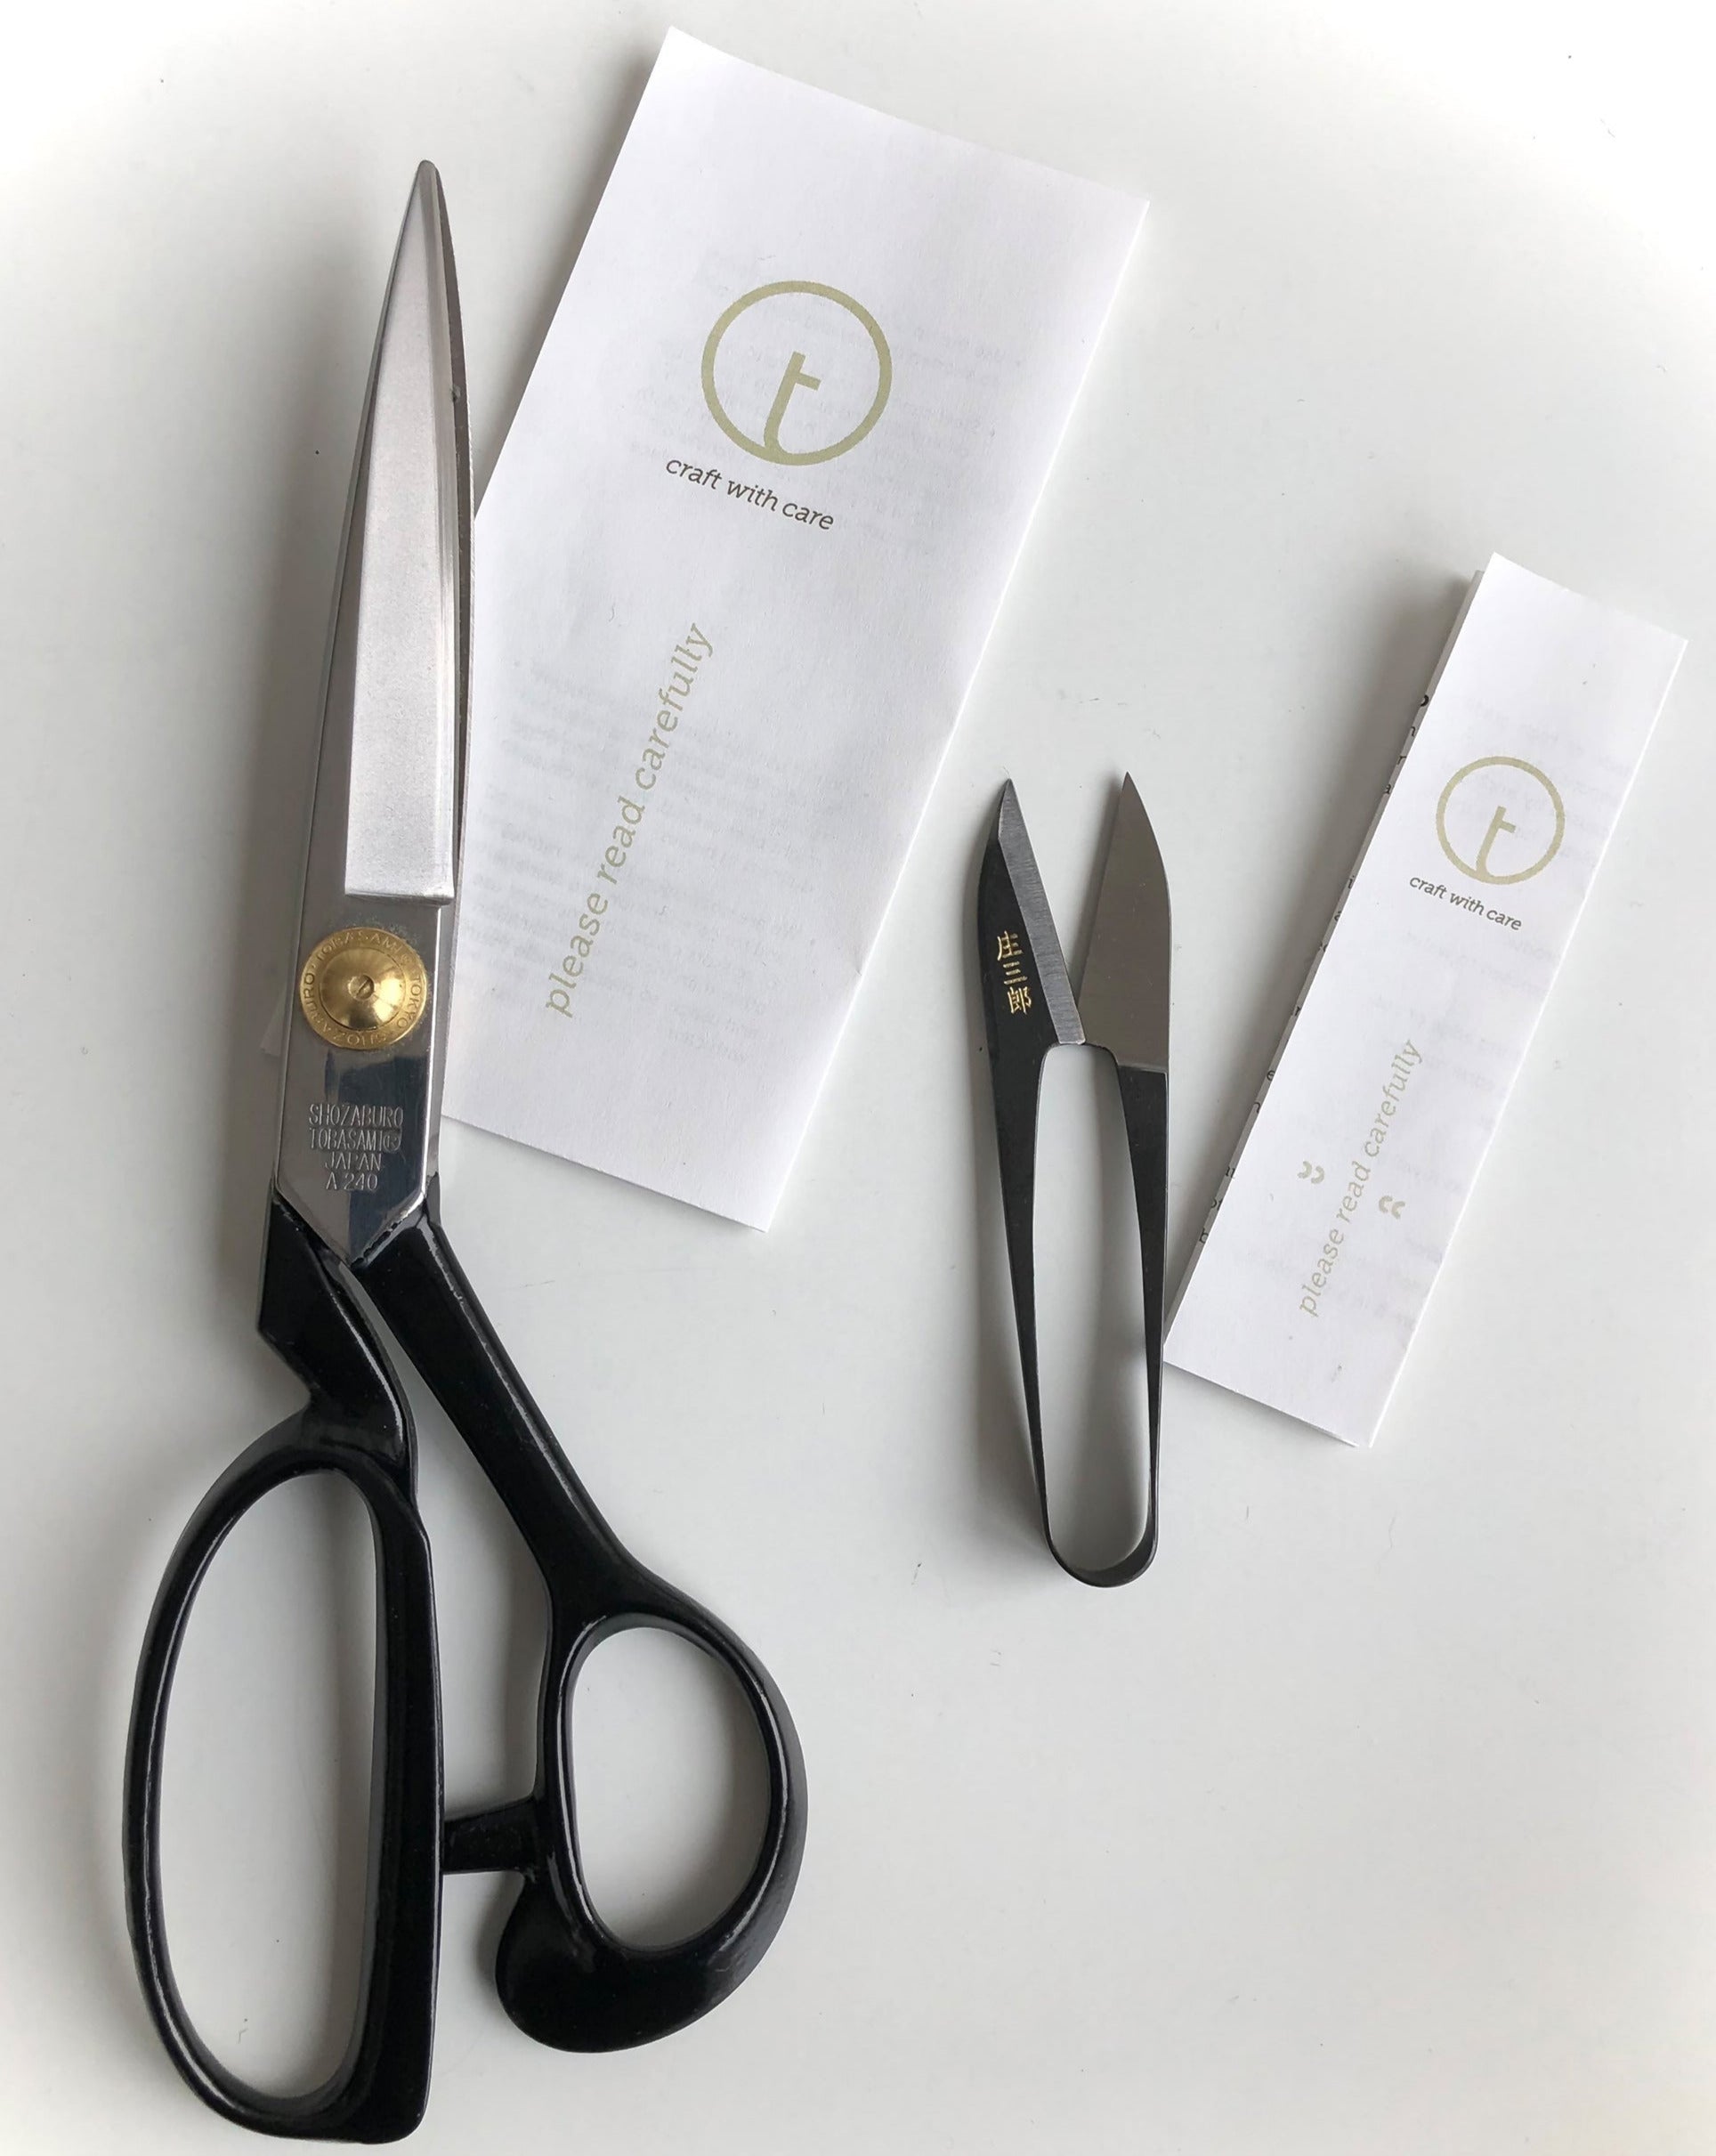 Japanese scissors and Thread Snips with Careguide